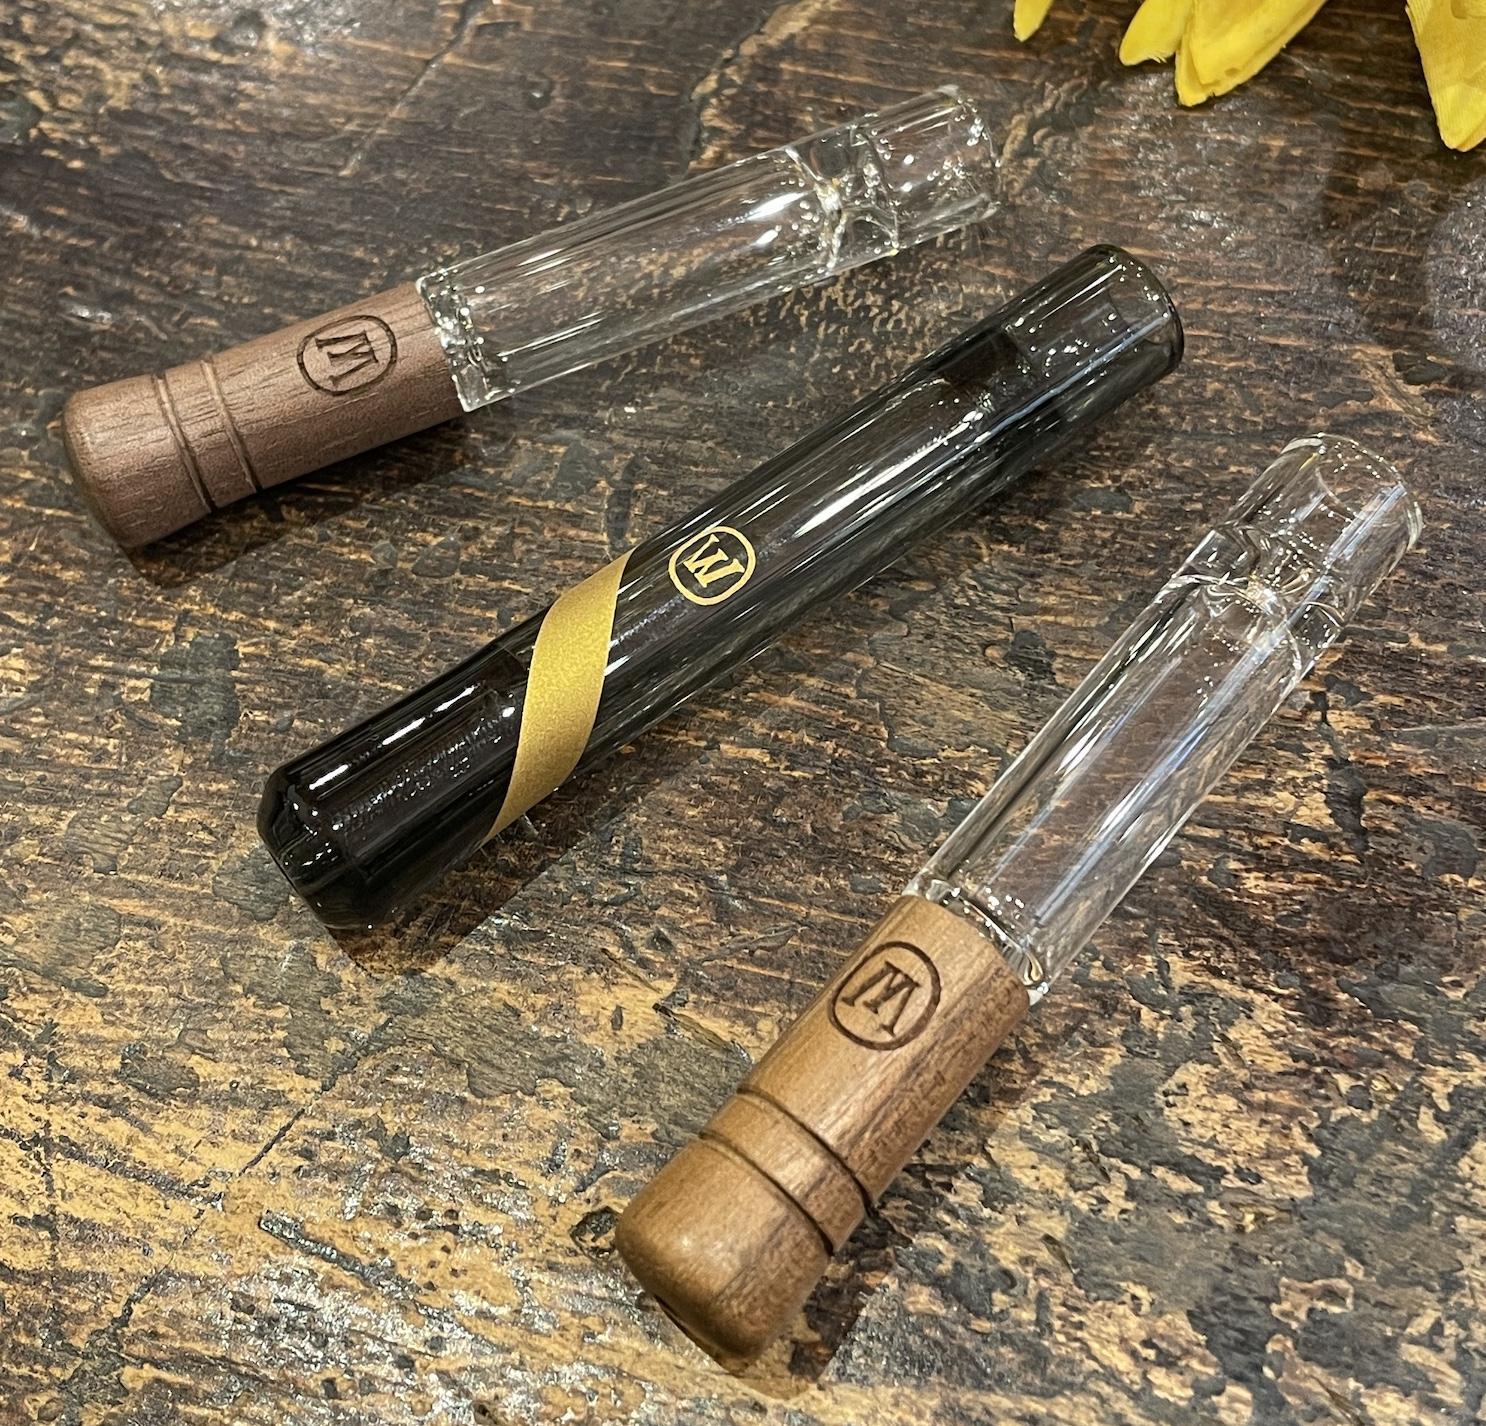 Marley Natural Taster - Sunflower Pipes Brooklyn's Best Smoke Shop